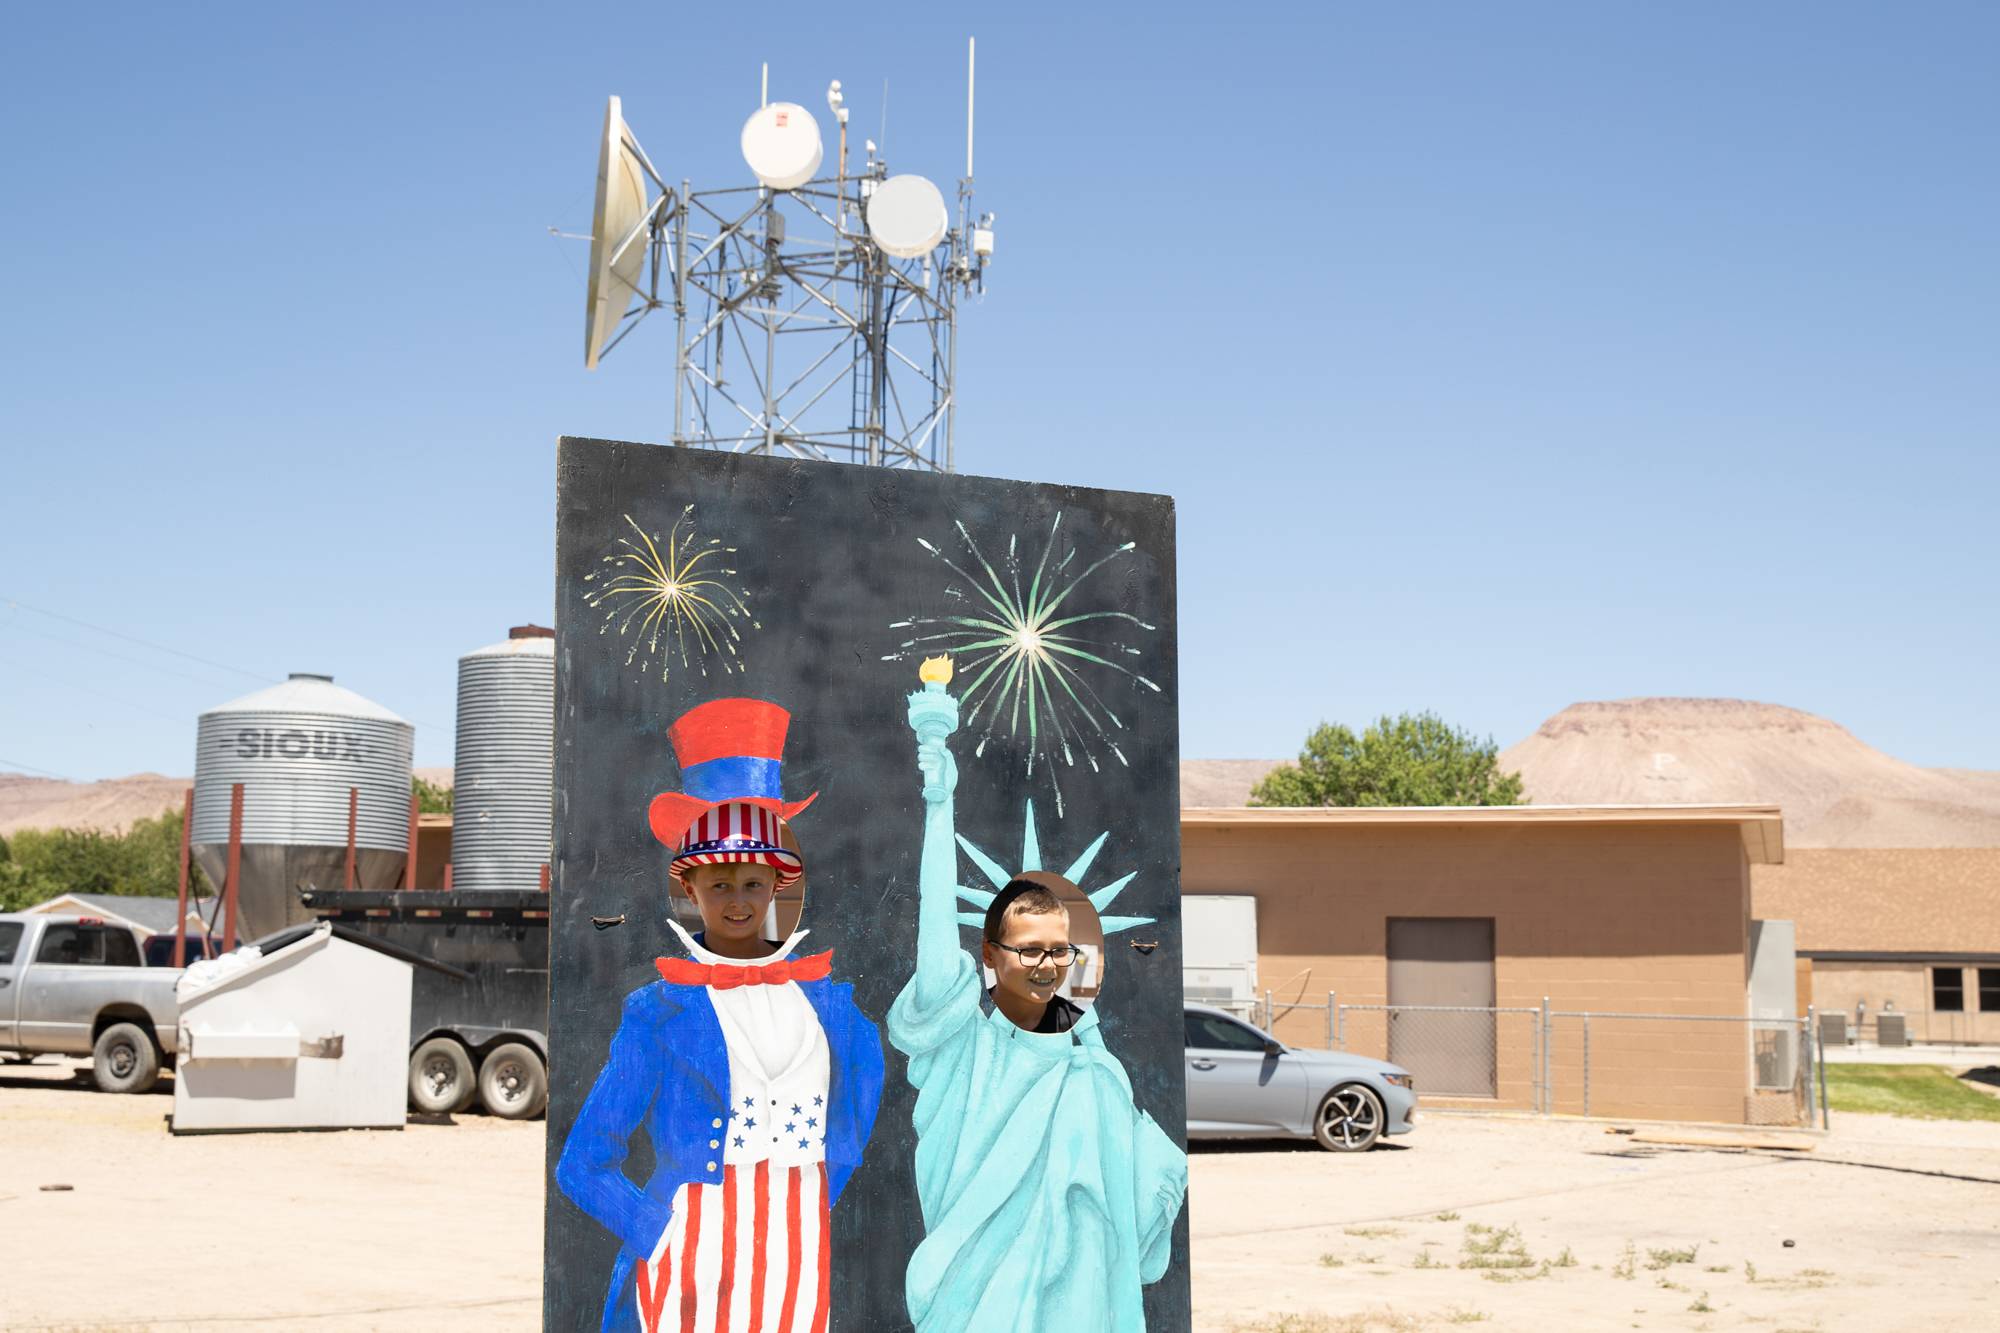 Two boys watch the Independence Day fair through the photo stand-in in Alamo, Nevada, on Monday, July 4, 2022.